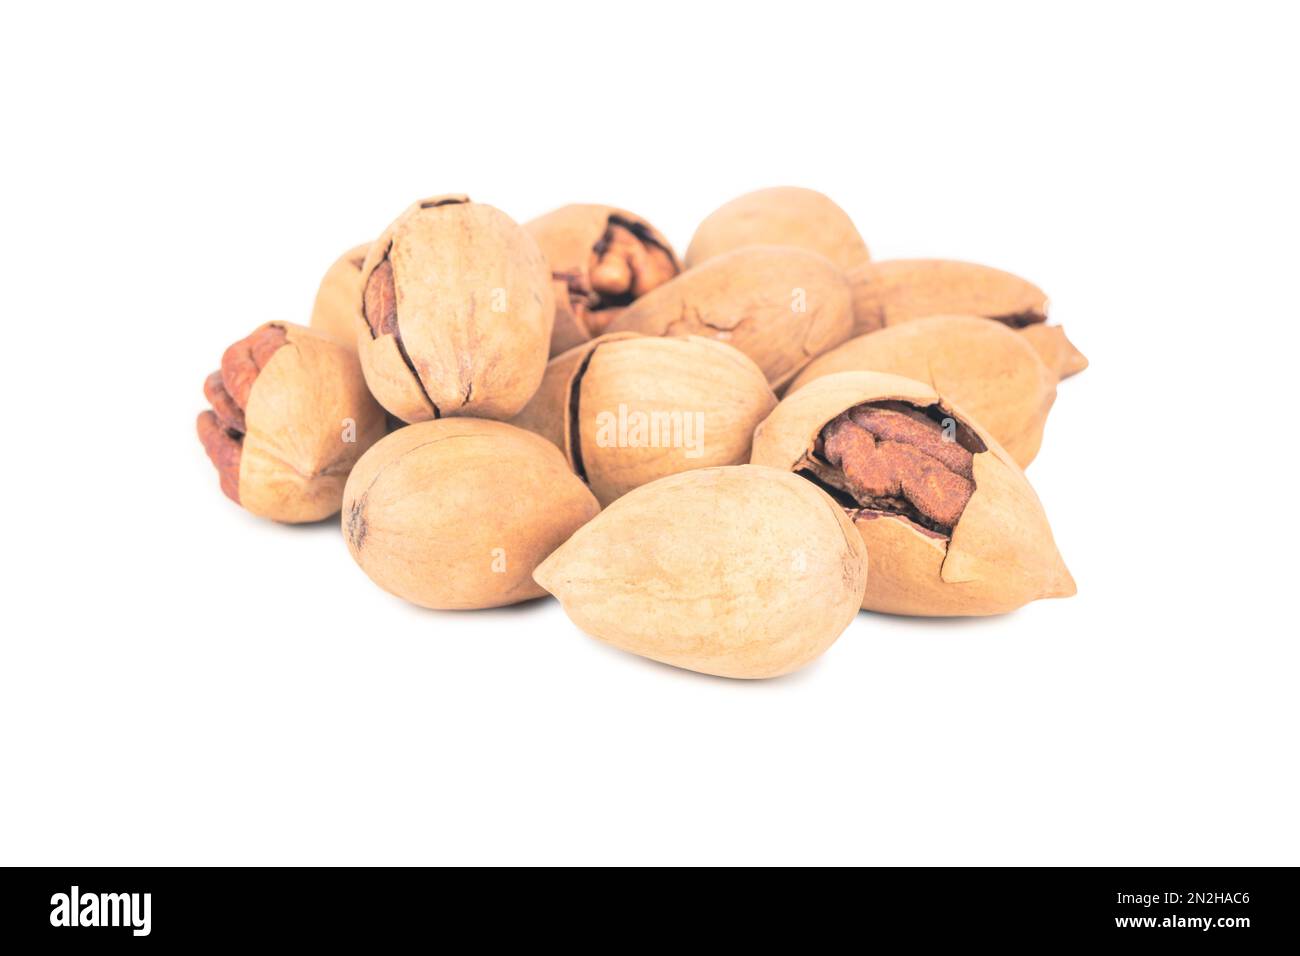 Bunch of inshell pecans on white background Stock Photo